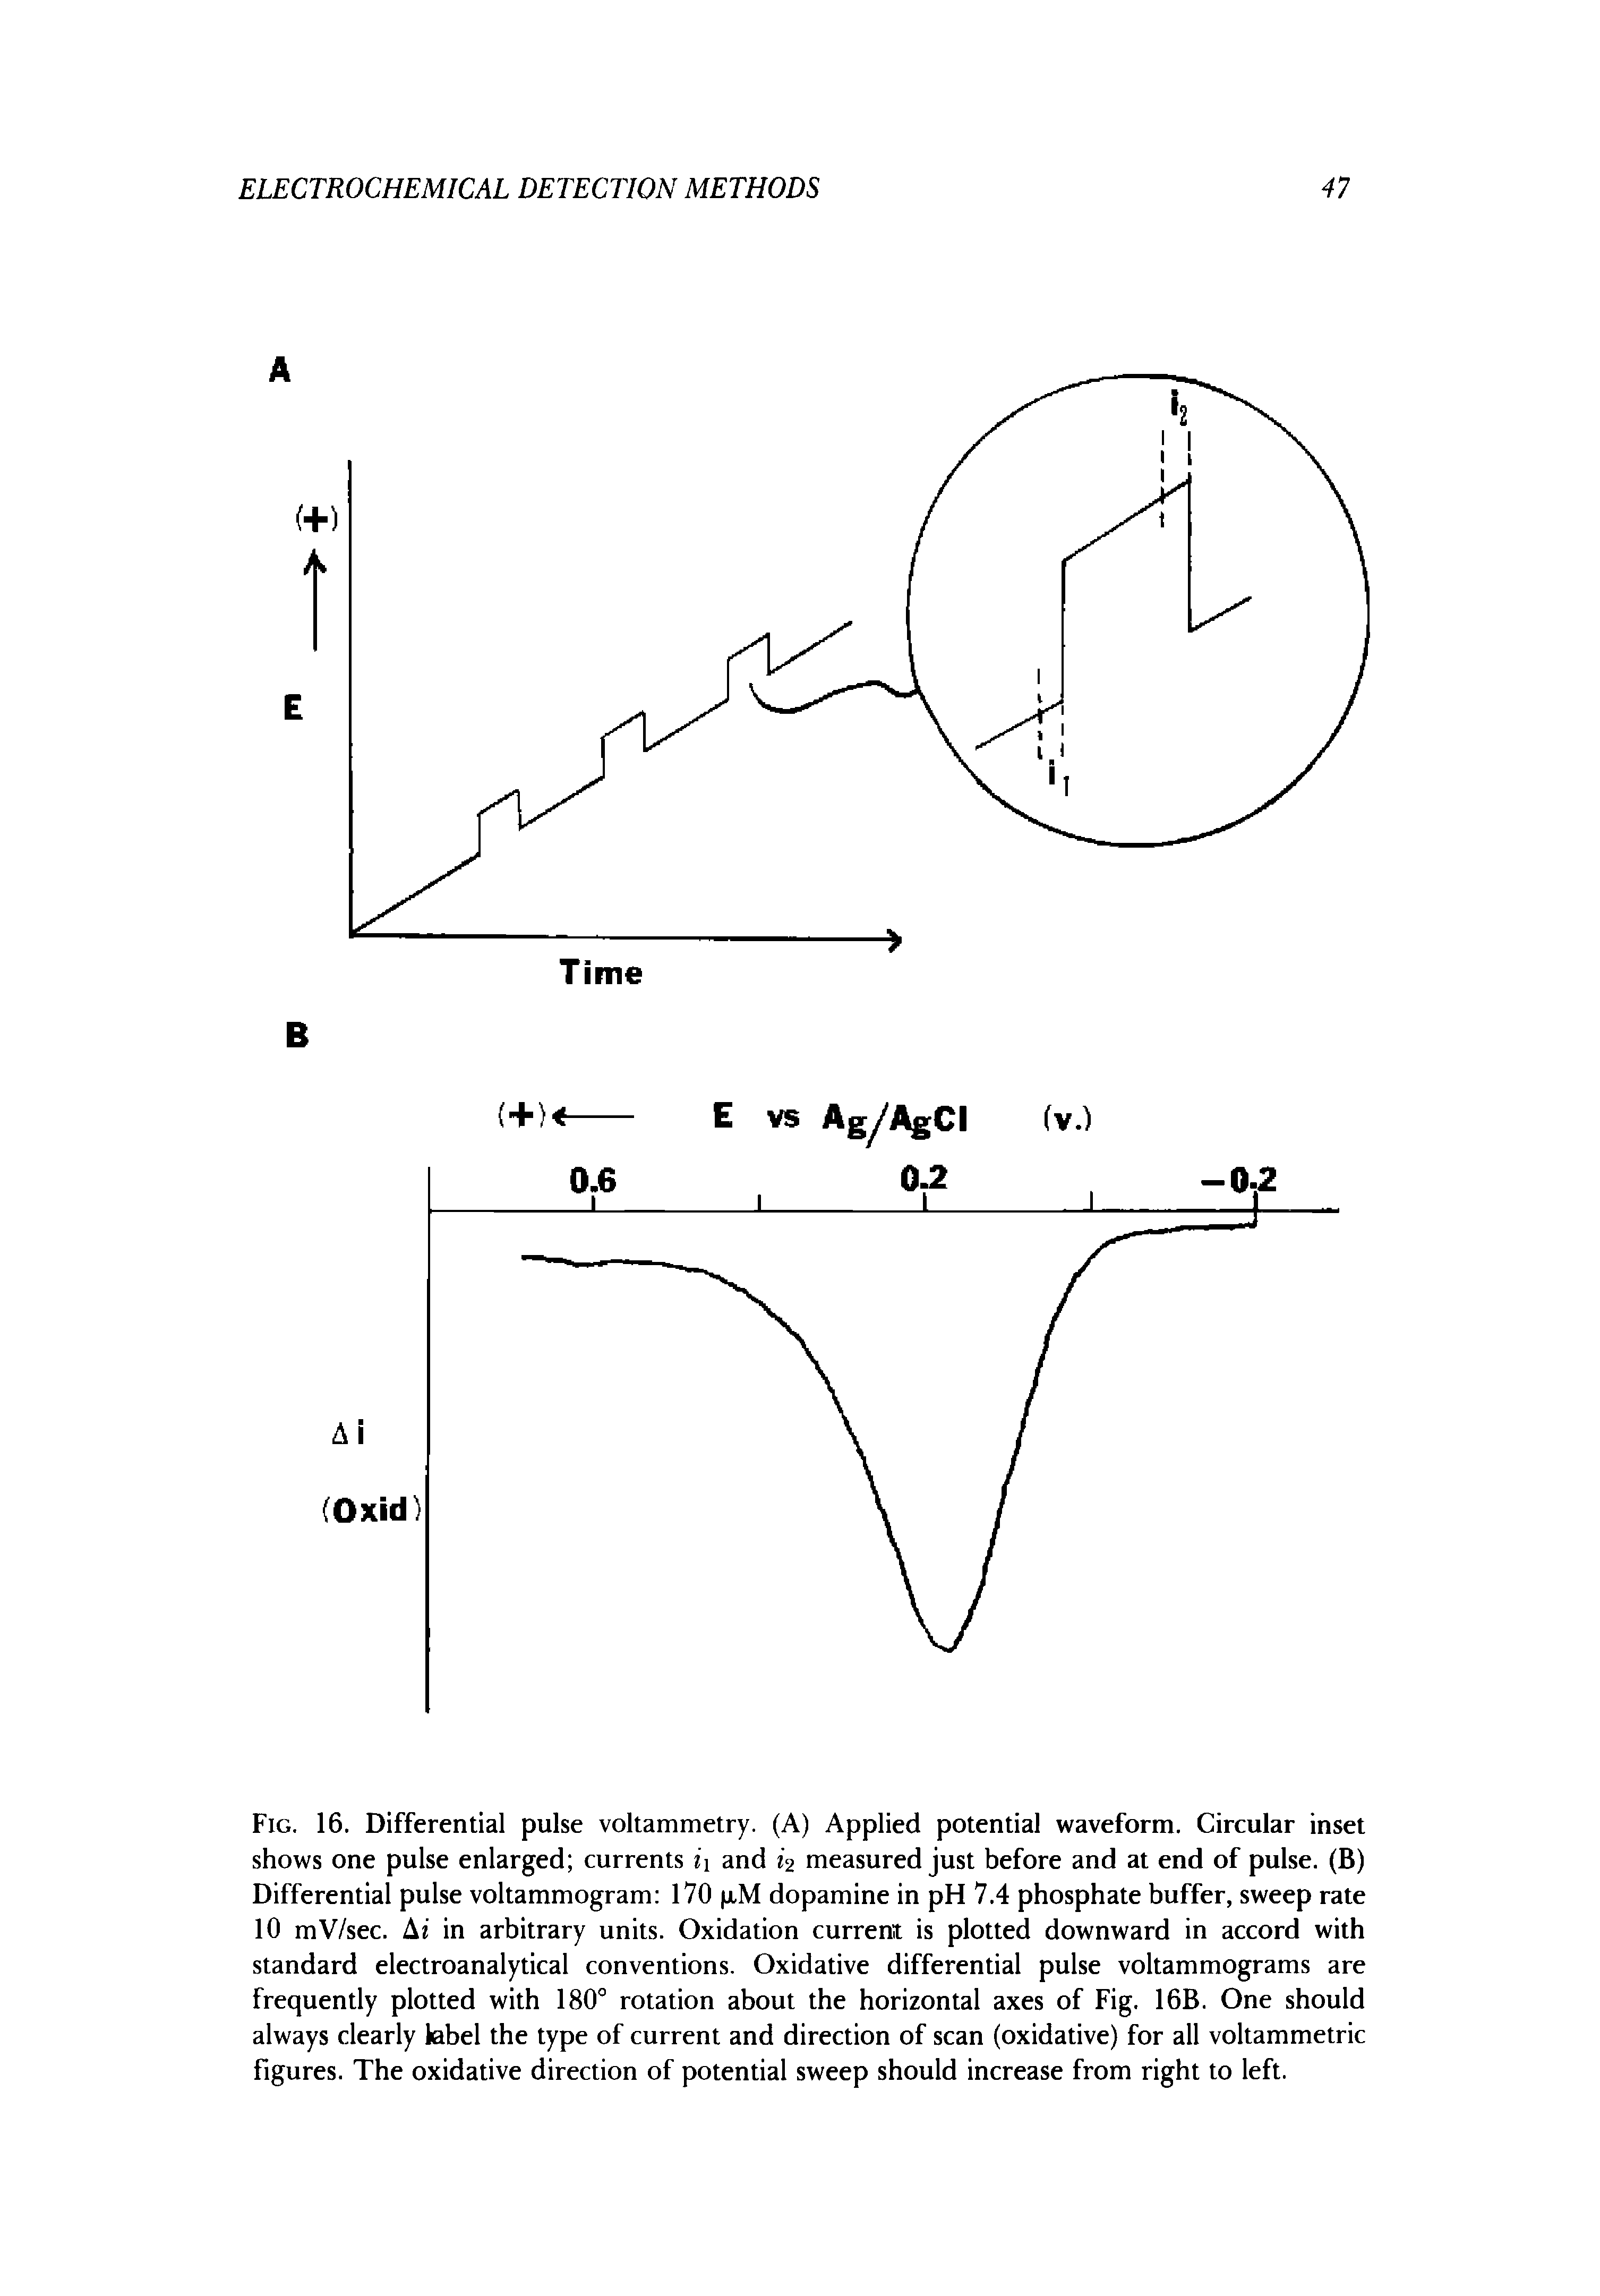 Fig. 16. Differential pulse voltammetry. (A) Applied potential waveform. Circular inset shows one pulse enlarged currents ii and i2 measured just before and at end of pulse. (B) Differential pulse voltammogram 170 jjlM dopamine in pH 7.4 phosphate buffer, sweep rate 10 mV/sec. At in arbitrary units. Oxidation current is plotted downward in accord with standard electroanalytical conventions. Oxidative differential pulse voltammograms are frequently plotted with 180° rotation about the horizontal axes of Fig. 16B. One should always clearly label the type of current and direction of scan (oxidative) for all voltammetric figures. The oxidative direction of potential sweep should increase from right to left.